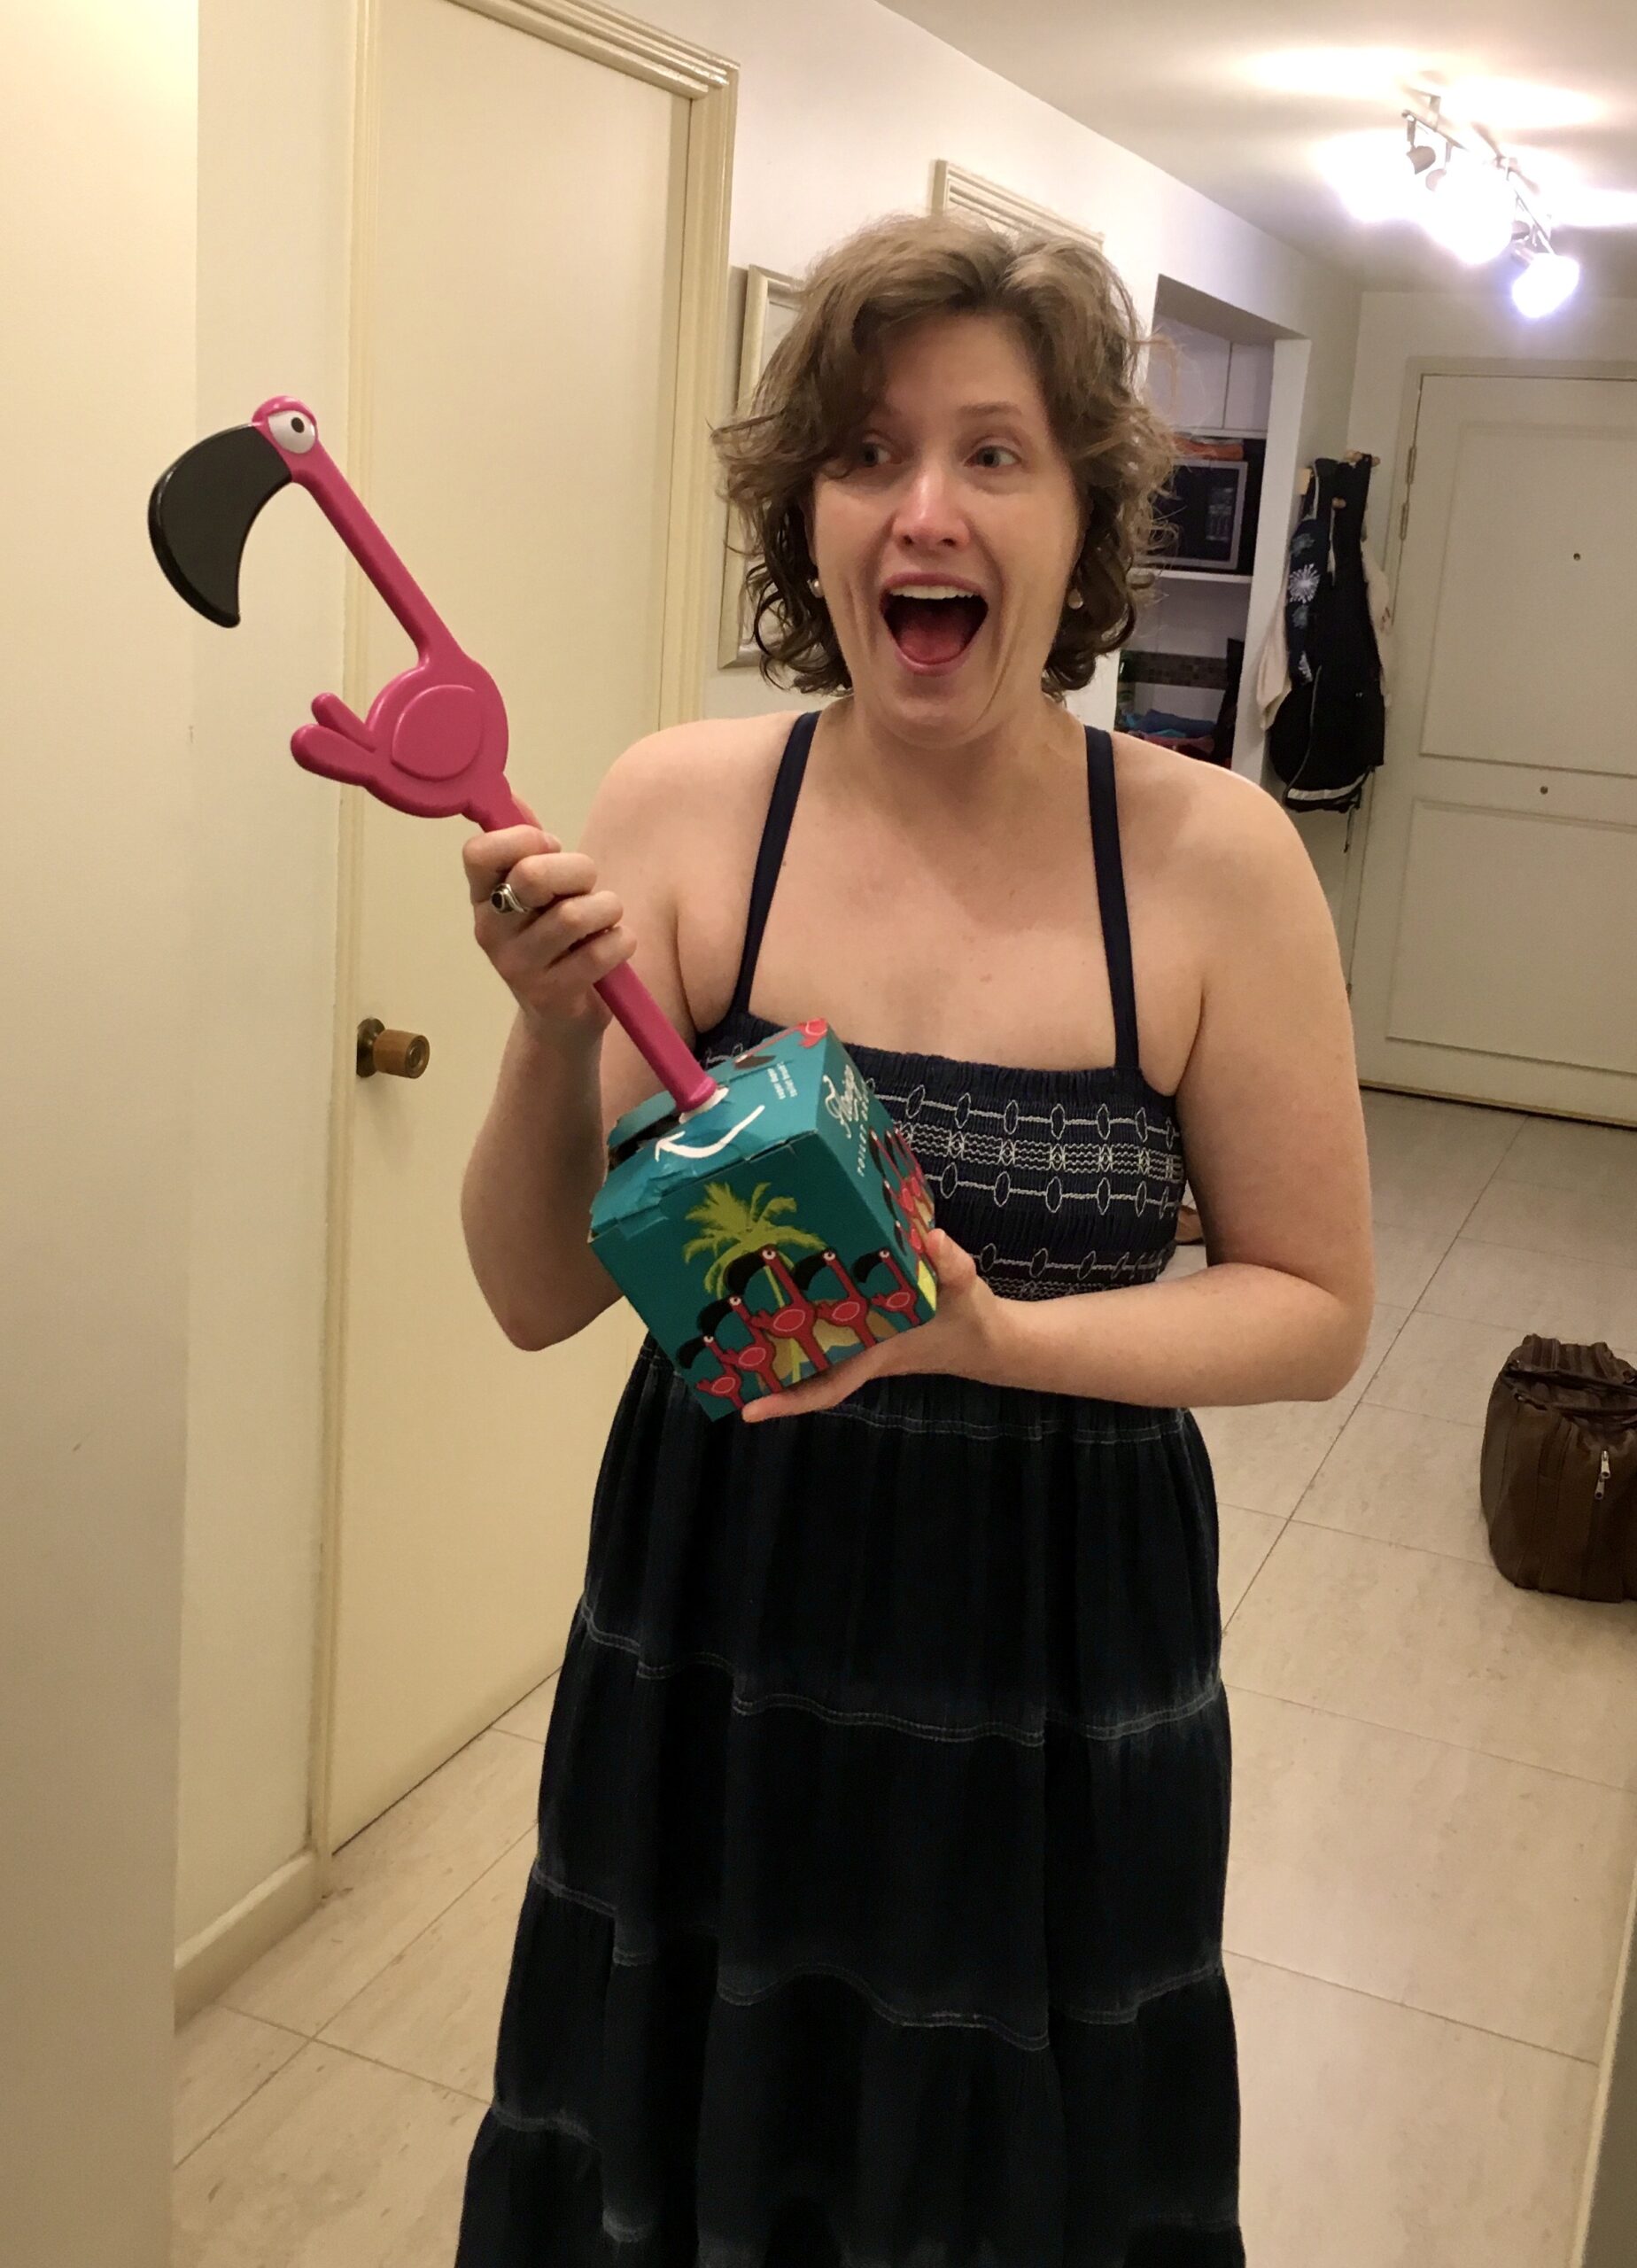 A woman in a denim sundress stands in a hallway. She is holding a toilet brush shaped like a neon pink plasti flamingo.  Her mouth is open in howl of absolute delight